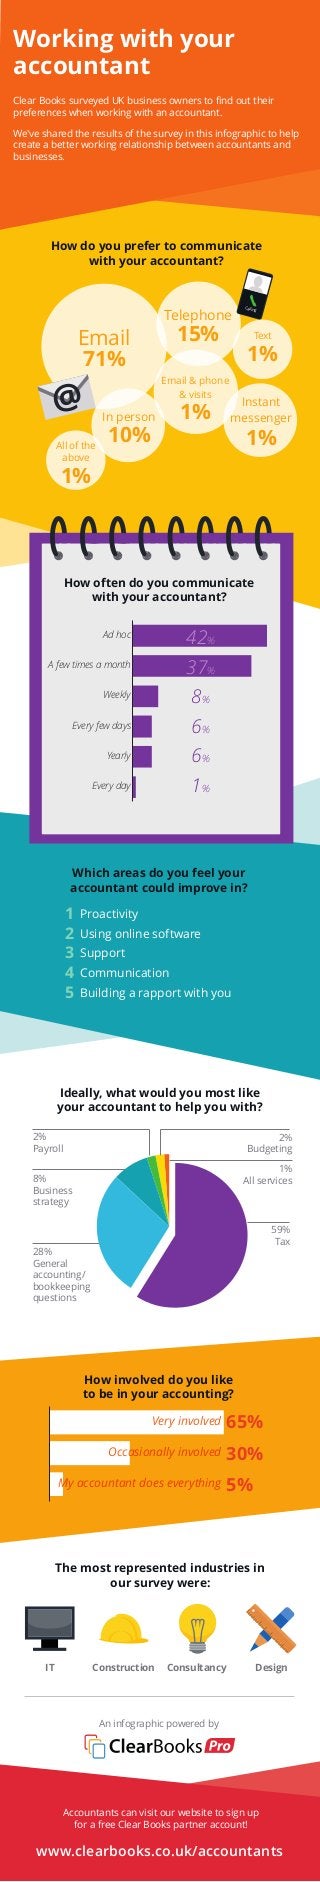 Which areas do you feel your
accountant could improve in?
Ideally, what would you most like
your accountant to help you with?
Proactivity
Using online software
Support
Communication
Building a rapport with you
59%
Tax
28%
General
accounting/
bookkeeping
questions
8%
Business
strategy
1%
All services
2%
Payroll
2%
Budgeting
How do you prefer to communicate
with your accountant?
Email
71%
Telephone
15%
In person
10%
Text
1%
@
Calling
How often do you communicate
with your accountant?
Every day
Yearly
Every few days
Weekly
A few times a month
Ad hoc
Instant
messenger
1%All of the
above
1%
How involved do you like
to be in your accounting?
Very involved
Occasionally involved
My accountant does everything
42%
37%
8%
6%
6%
1%
Clear Books surveyed UK business owners to find out their
preferences when working with an accountant.
We've shared the results of the survey in this infographic to help
create a better working relationship between accountants and
businesses.
Working with your
accountant
Email & phone
& visits
1%
1
2
3
4
5
An infographic powered by
www.clearbooks.co.uk/accountants
Accountants can visit our website to sign up
for a free Clear Books partner account!
IT ConsultancyConstruction Design
The most represented industries in
our survey were:
65%
30%
5%
 